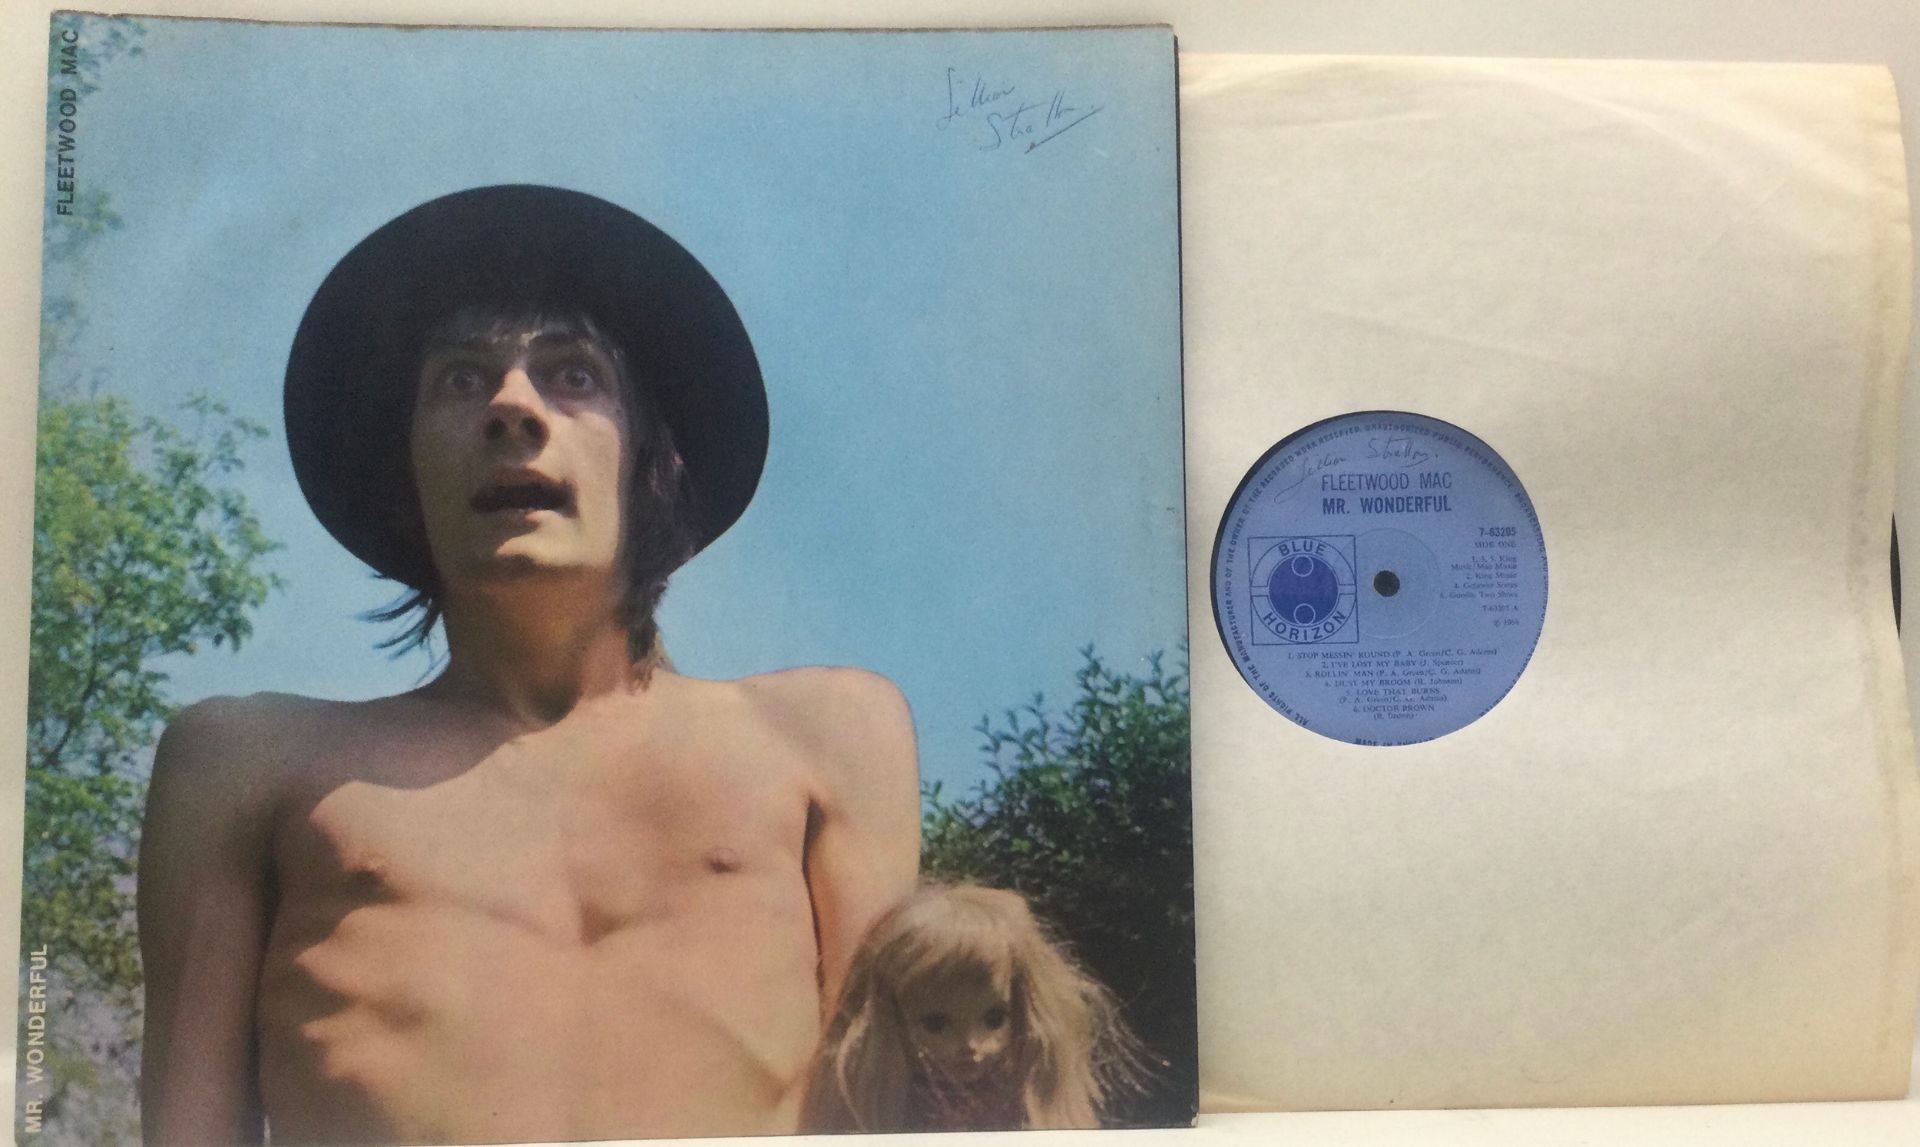 FLEETWOOD MAC VINYL LP RECORD 'MR WONDERFUL'. From 1968 we have this classic blues / rock album on